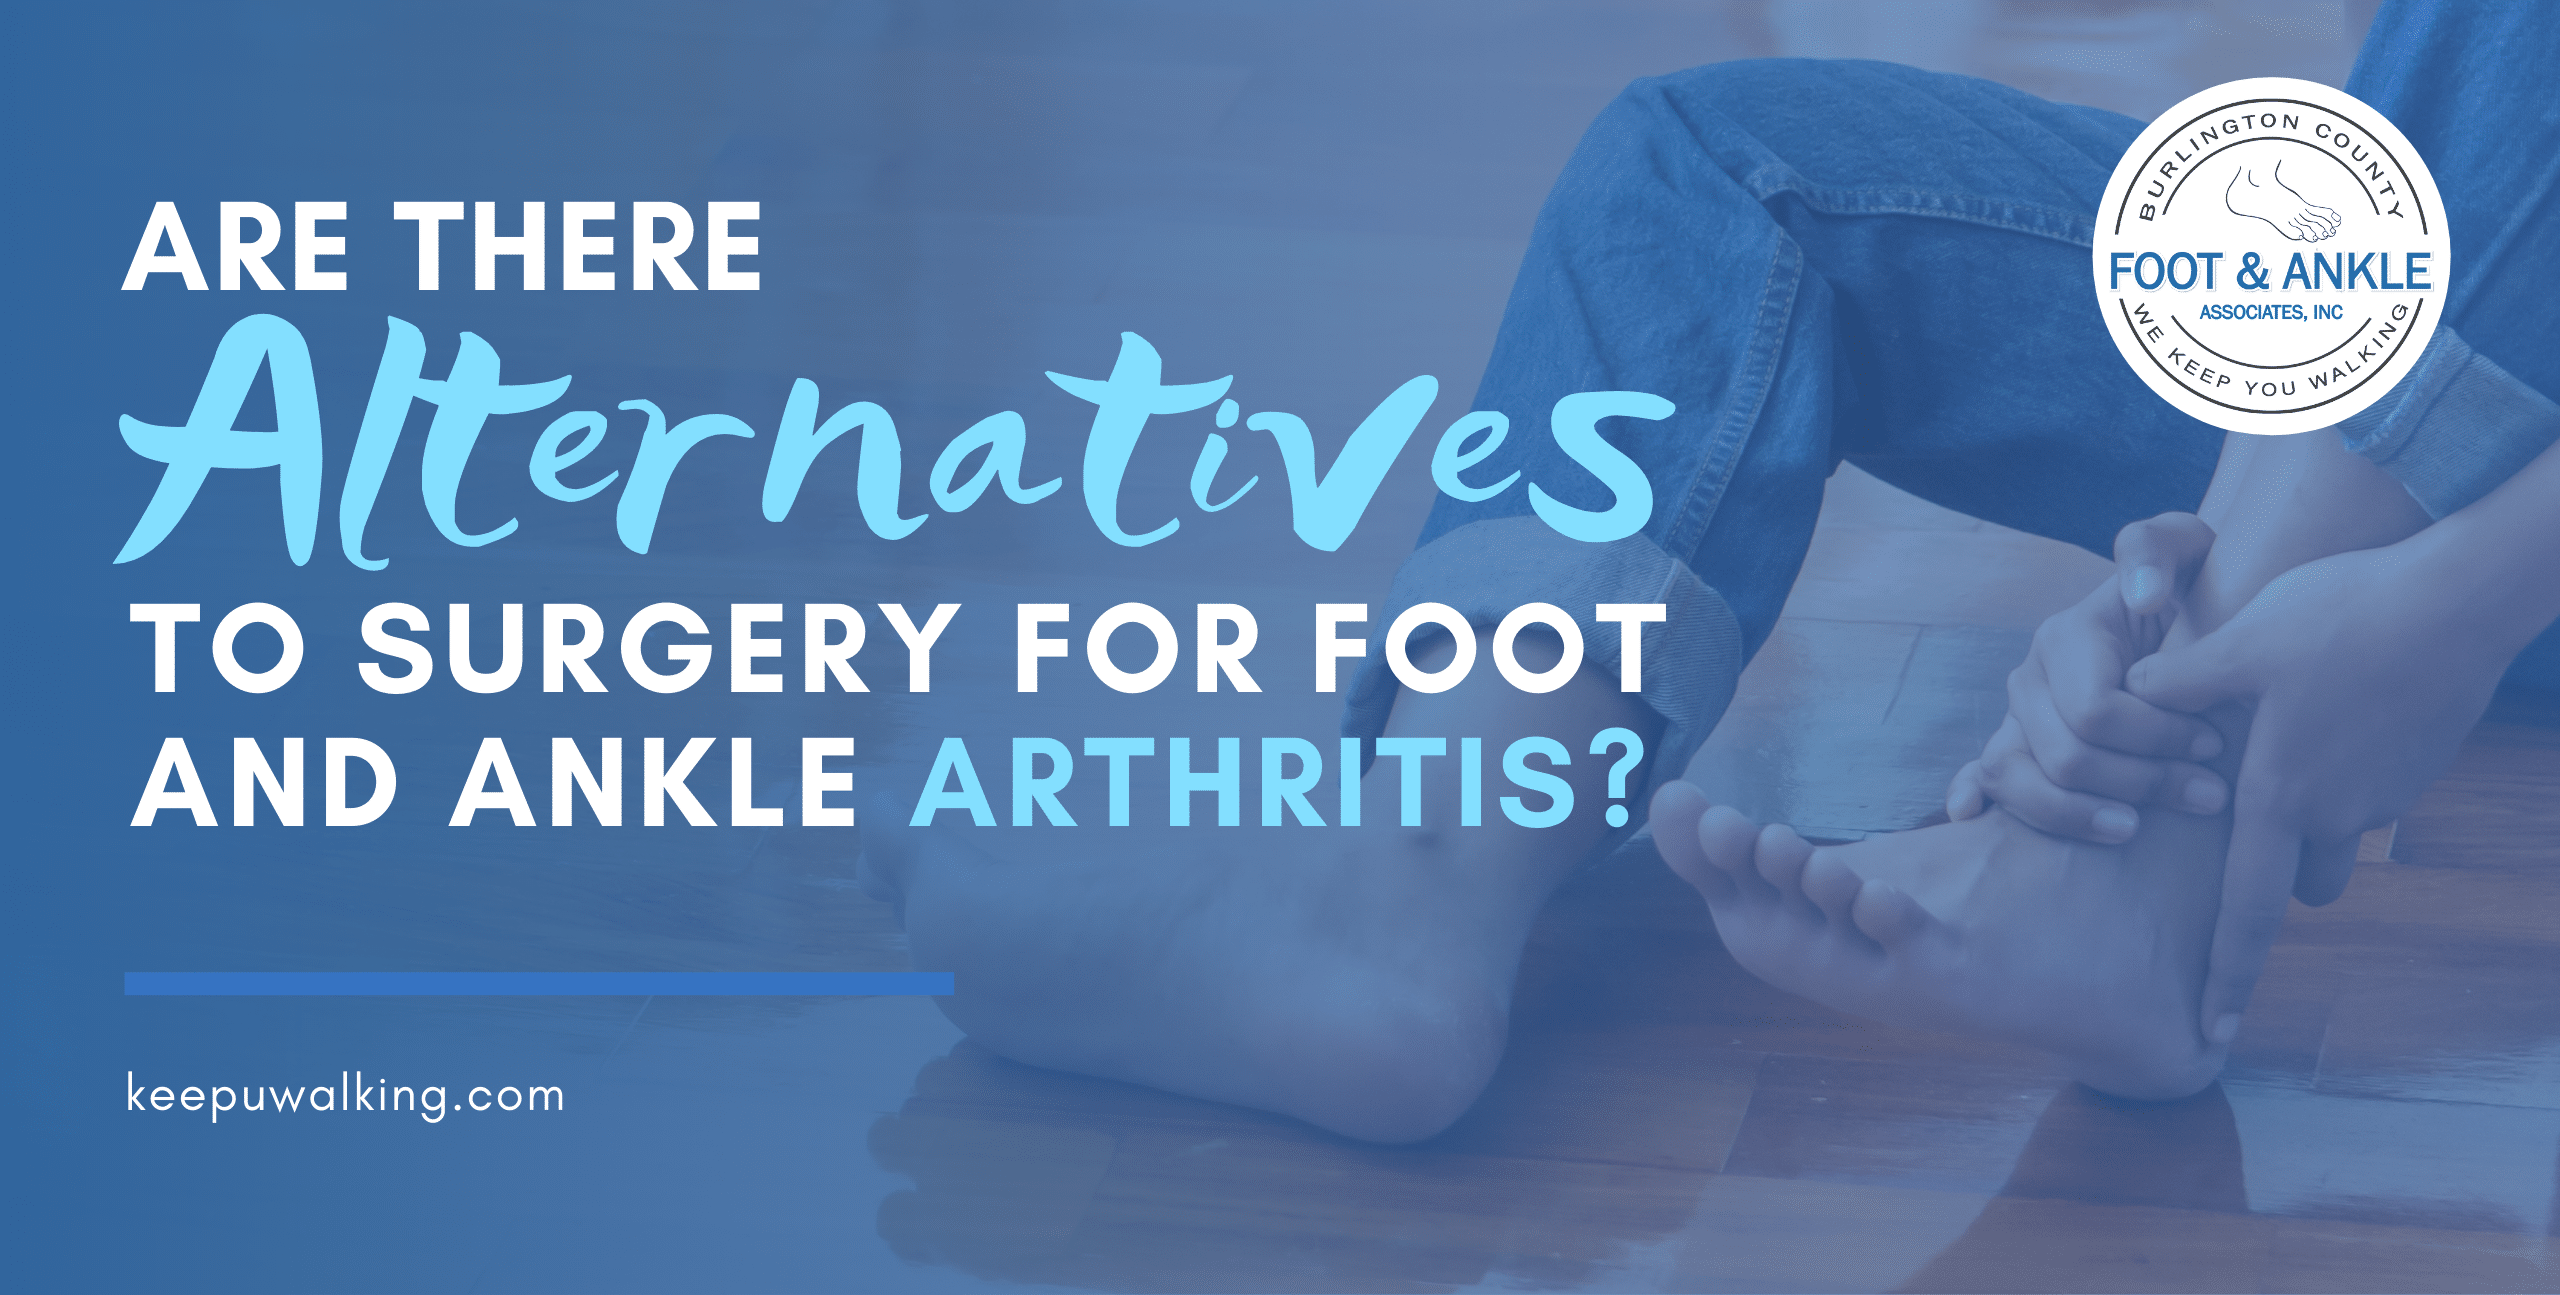 Are there alternatives to surgery for foot and ankle arthritis?